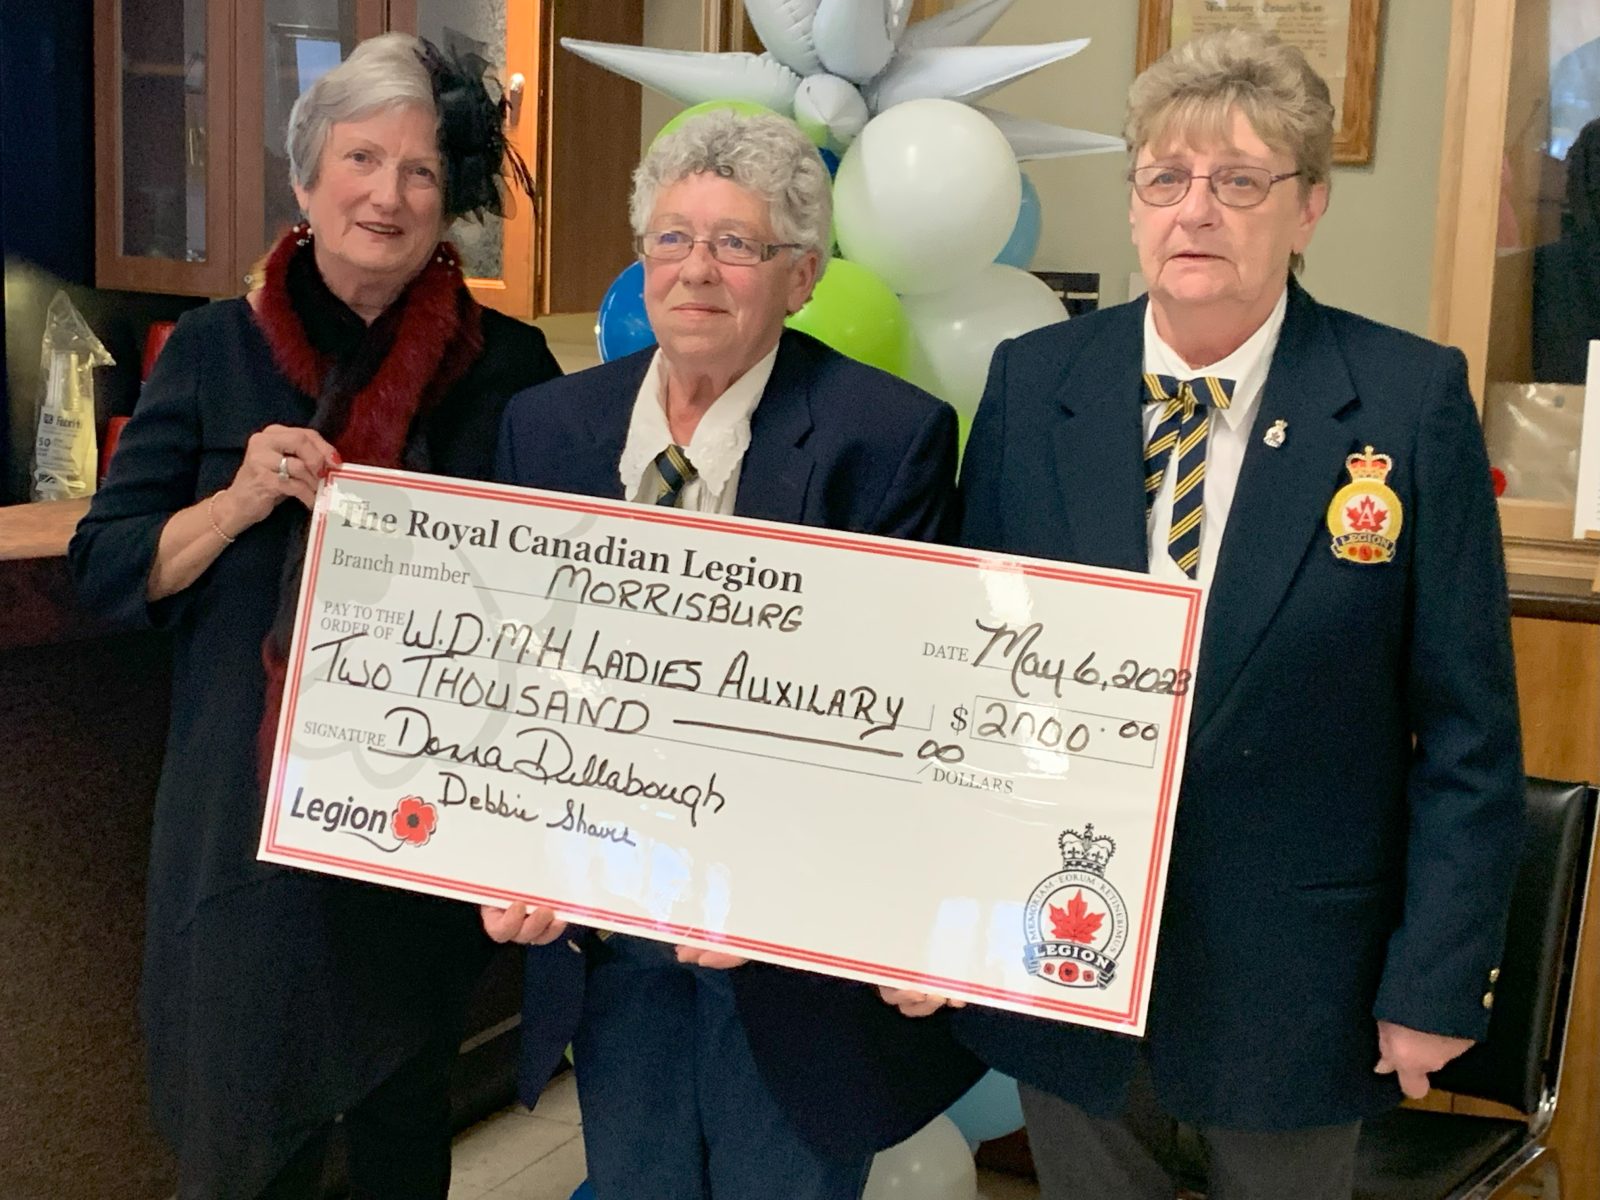 Morrisburg Legion & Women’s Auxiliary Supports WDMH Auxiliary with $2,000 Donation